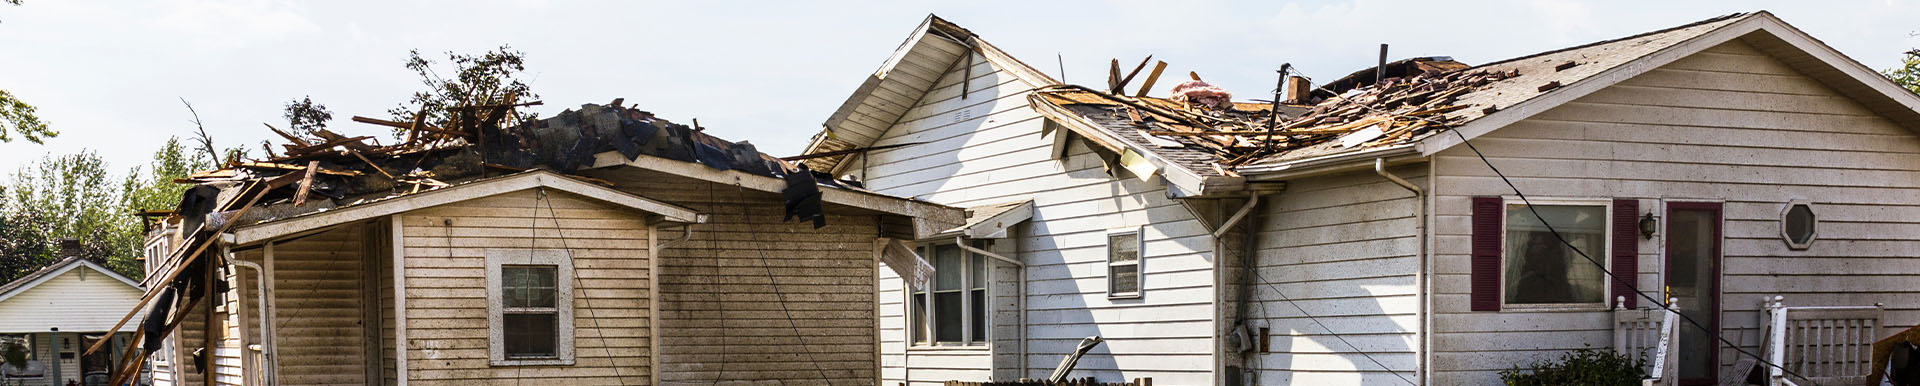 The exterior of two tornado and storm damaged homes in Burns Harbor, Indiana